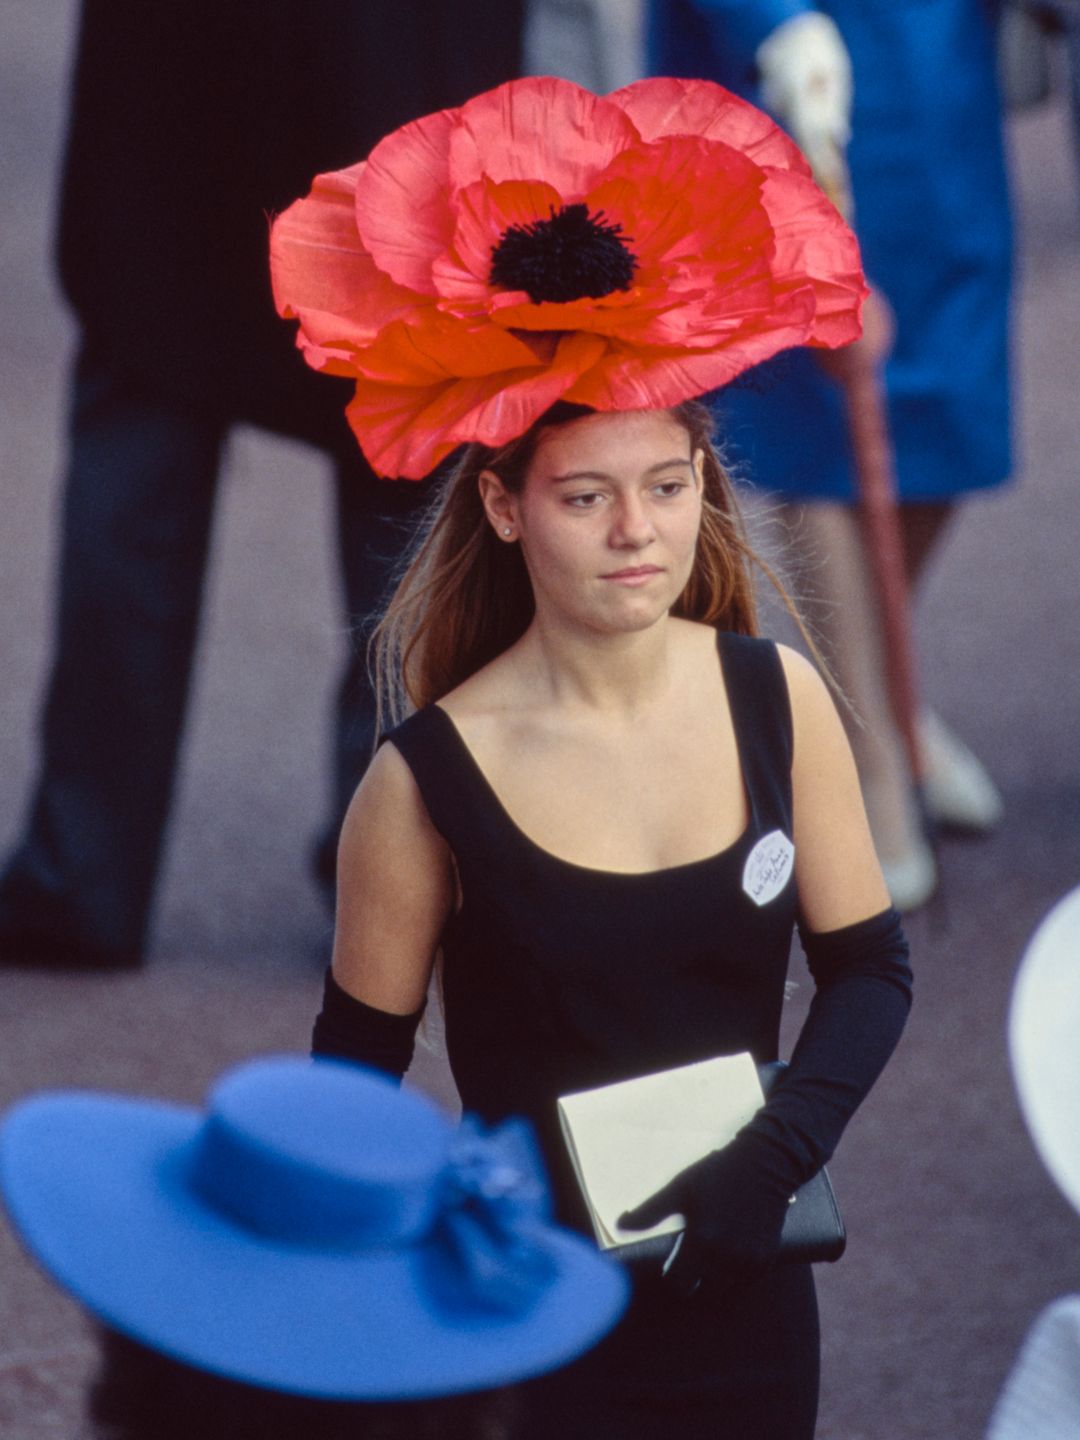 A female racegoer wearing a black dress, black gloves and a red poppy hat on the first day of Royal Ascot on June 19, 1990.